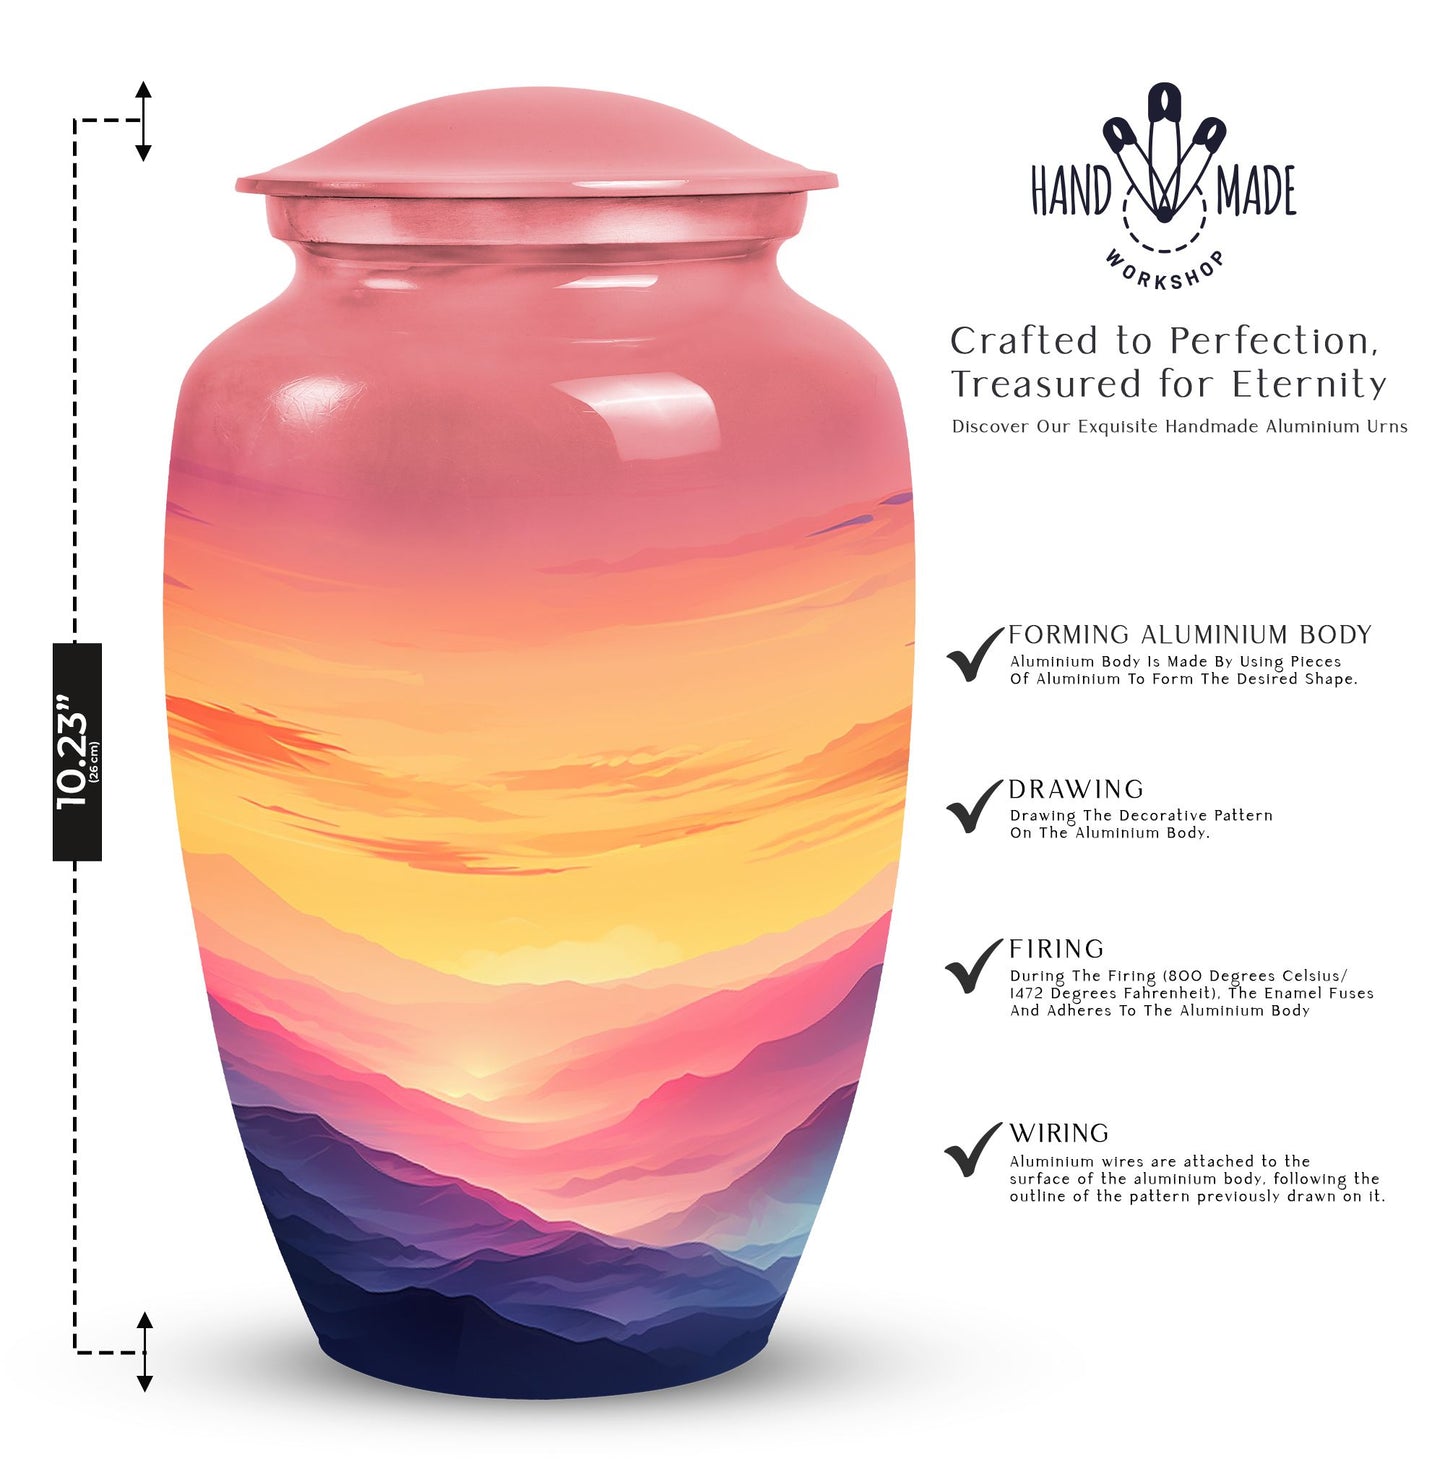 Large mountains themed decorative urn for adult ashes, suitable for men's burial